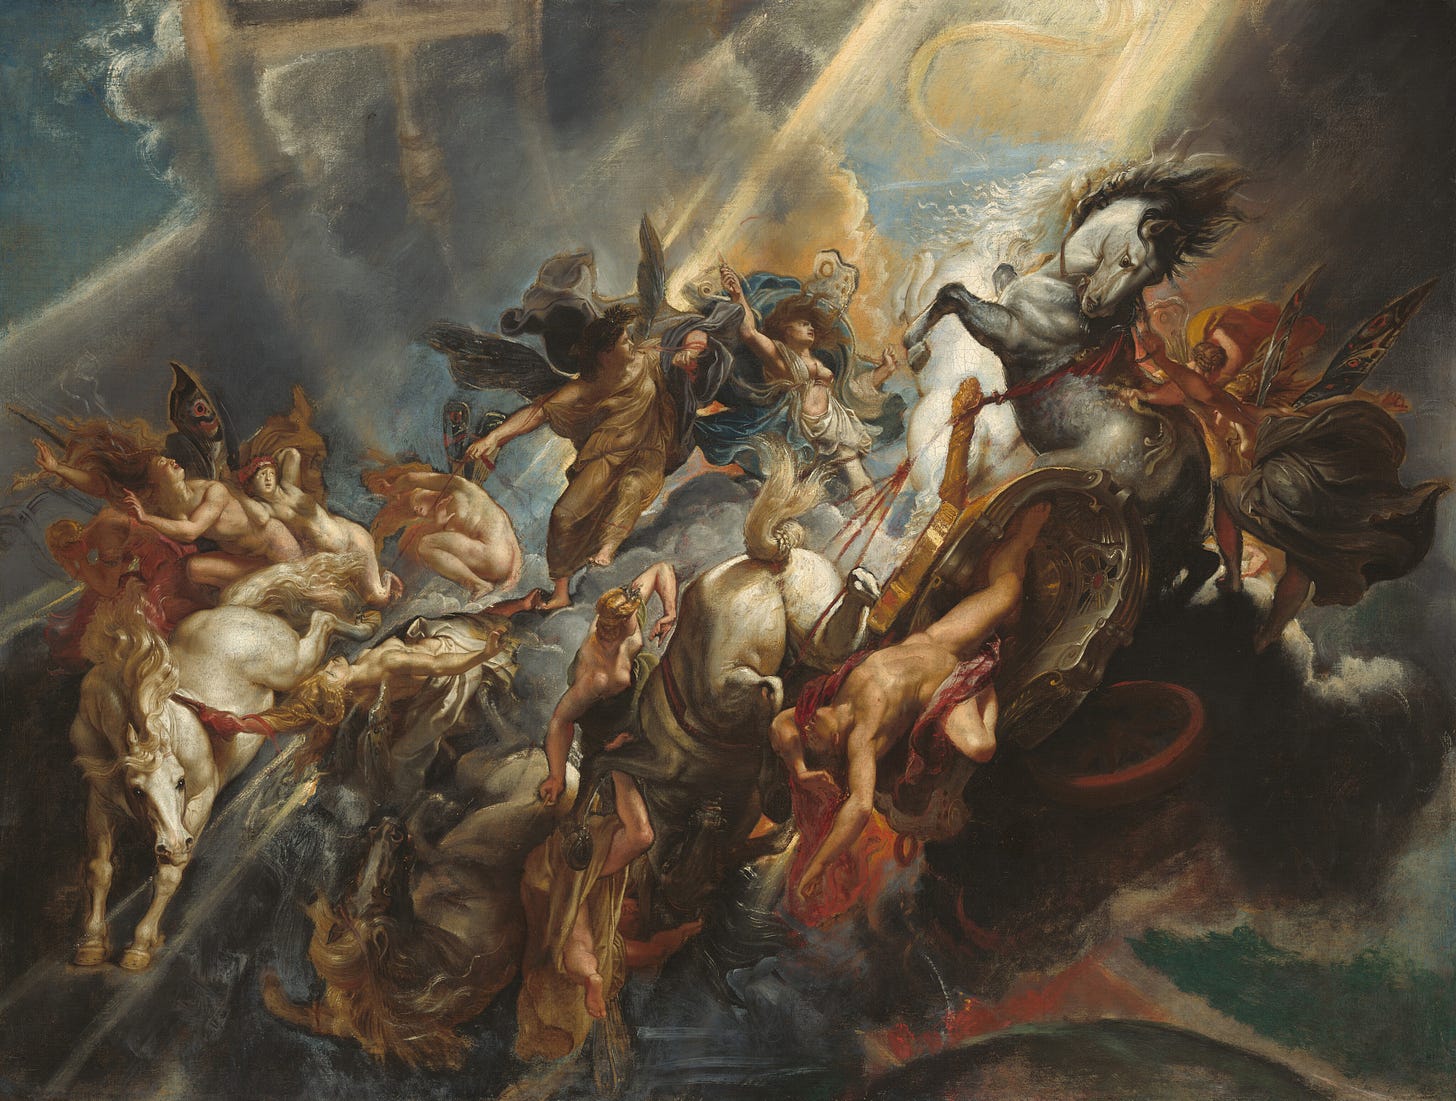 The Fall of Phaeton, c. 1604/1605, probably reworked c. 1606/1608 by Sir Peter Paul Rubens